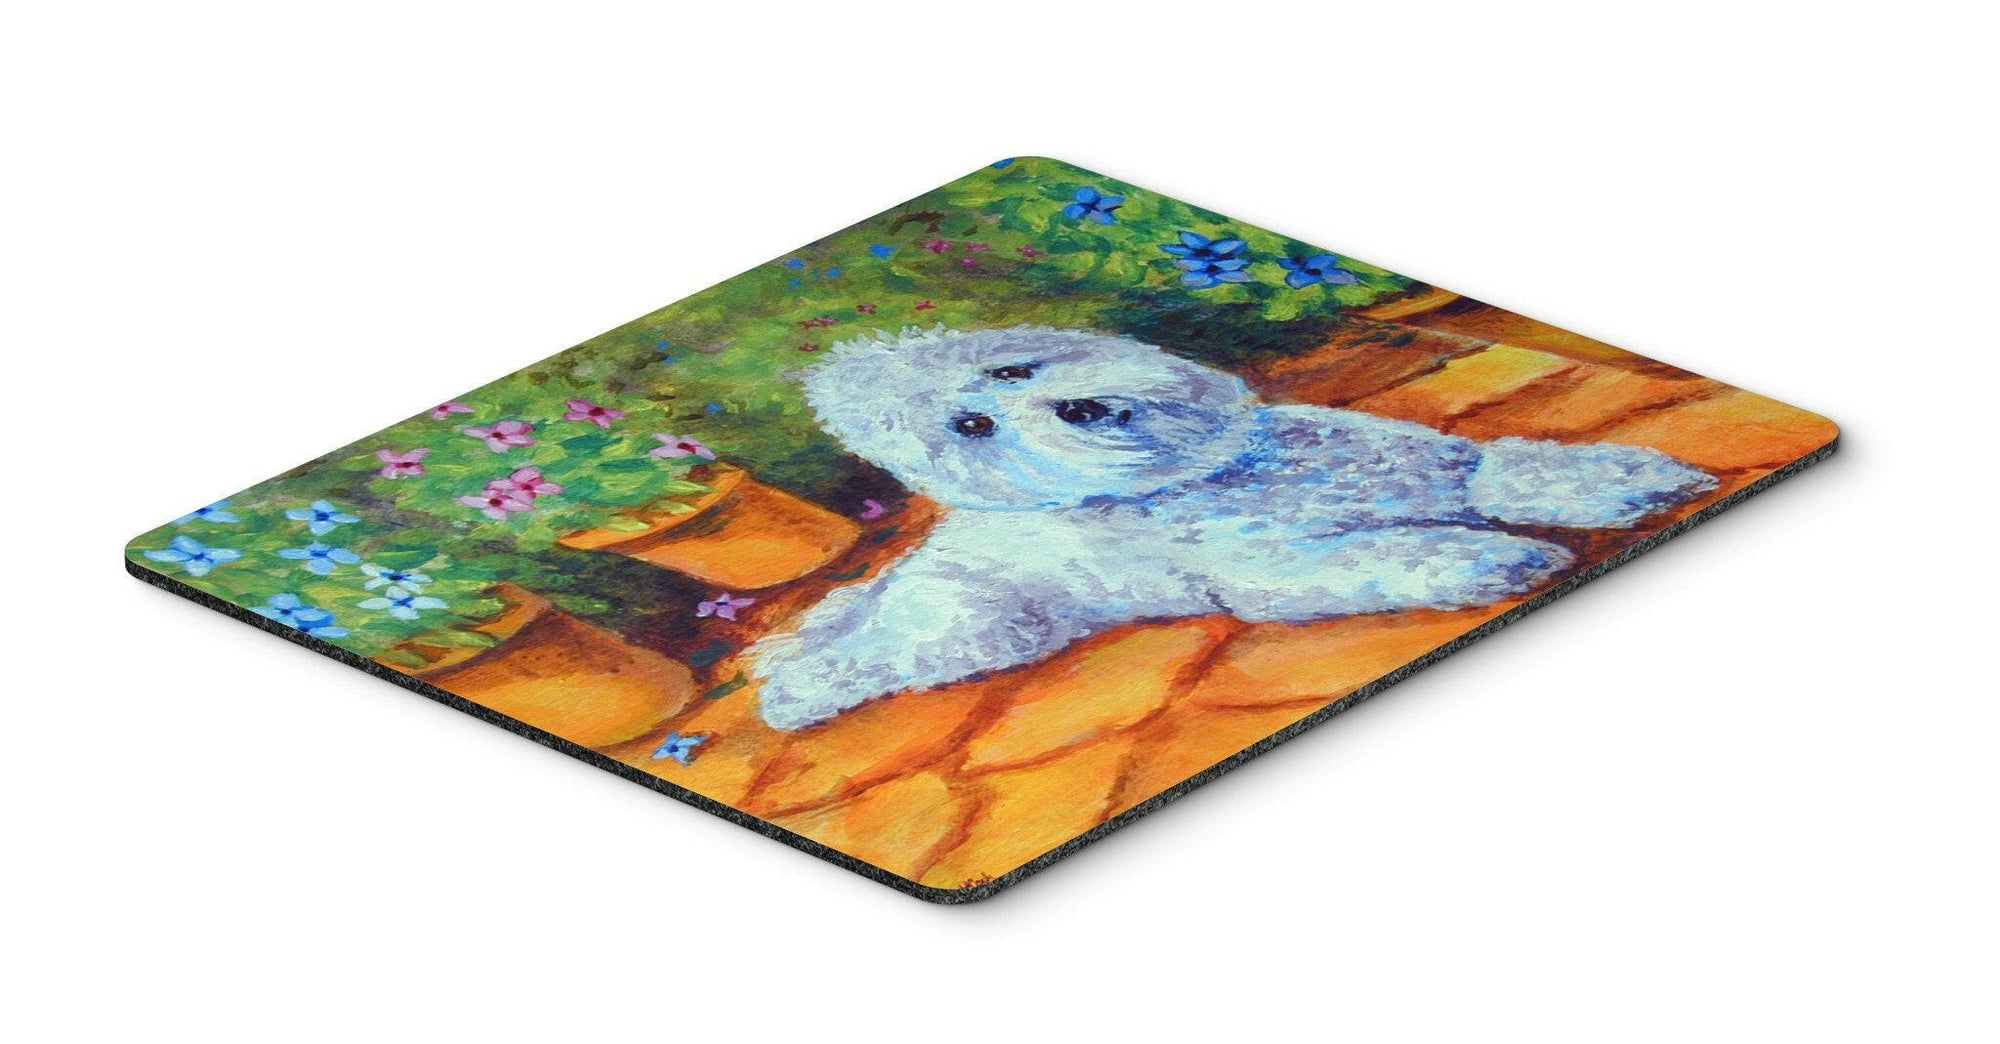 Bichon Frise on the patio Mouse Pad, Hot Pad or Trivet 7346MP by Caroline's Treasures